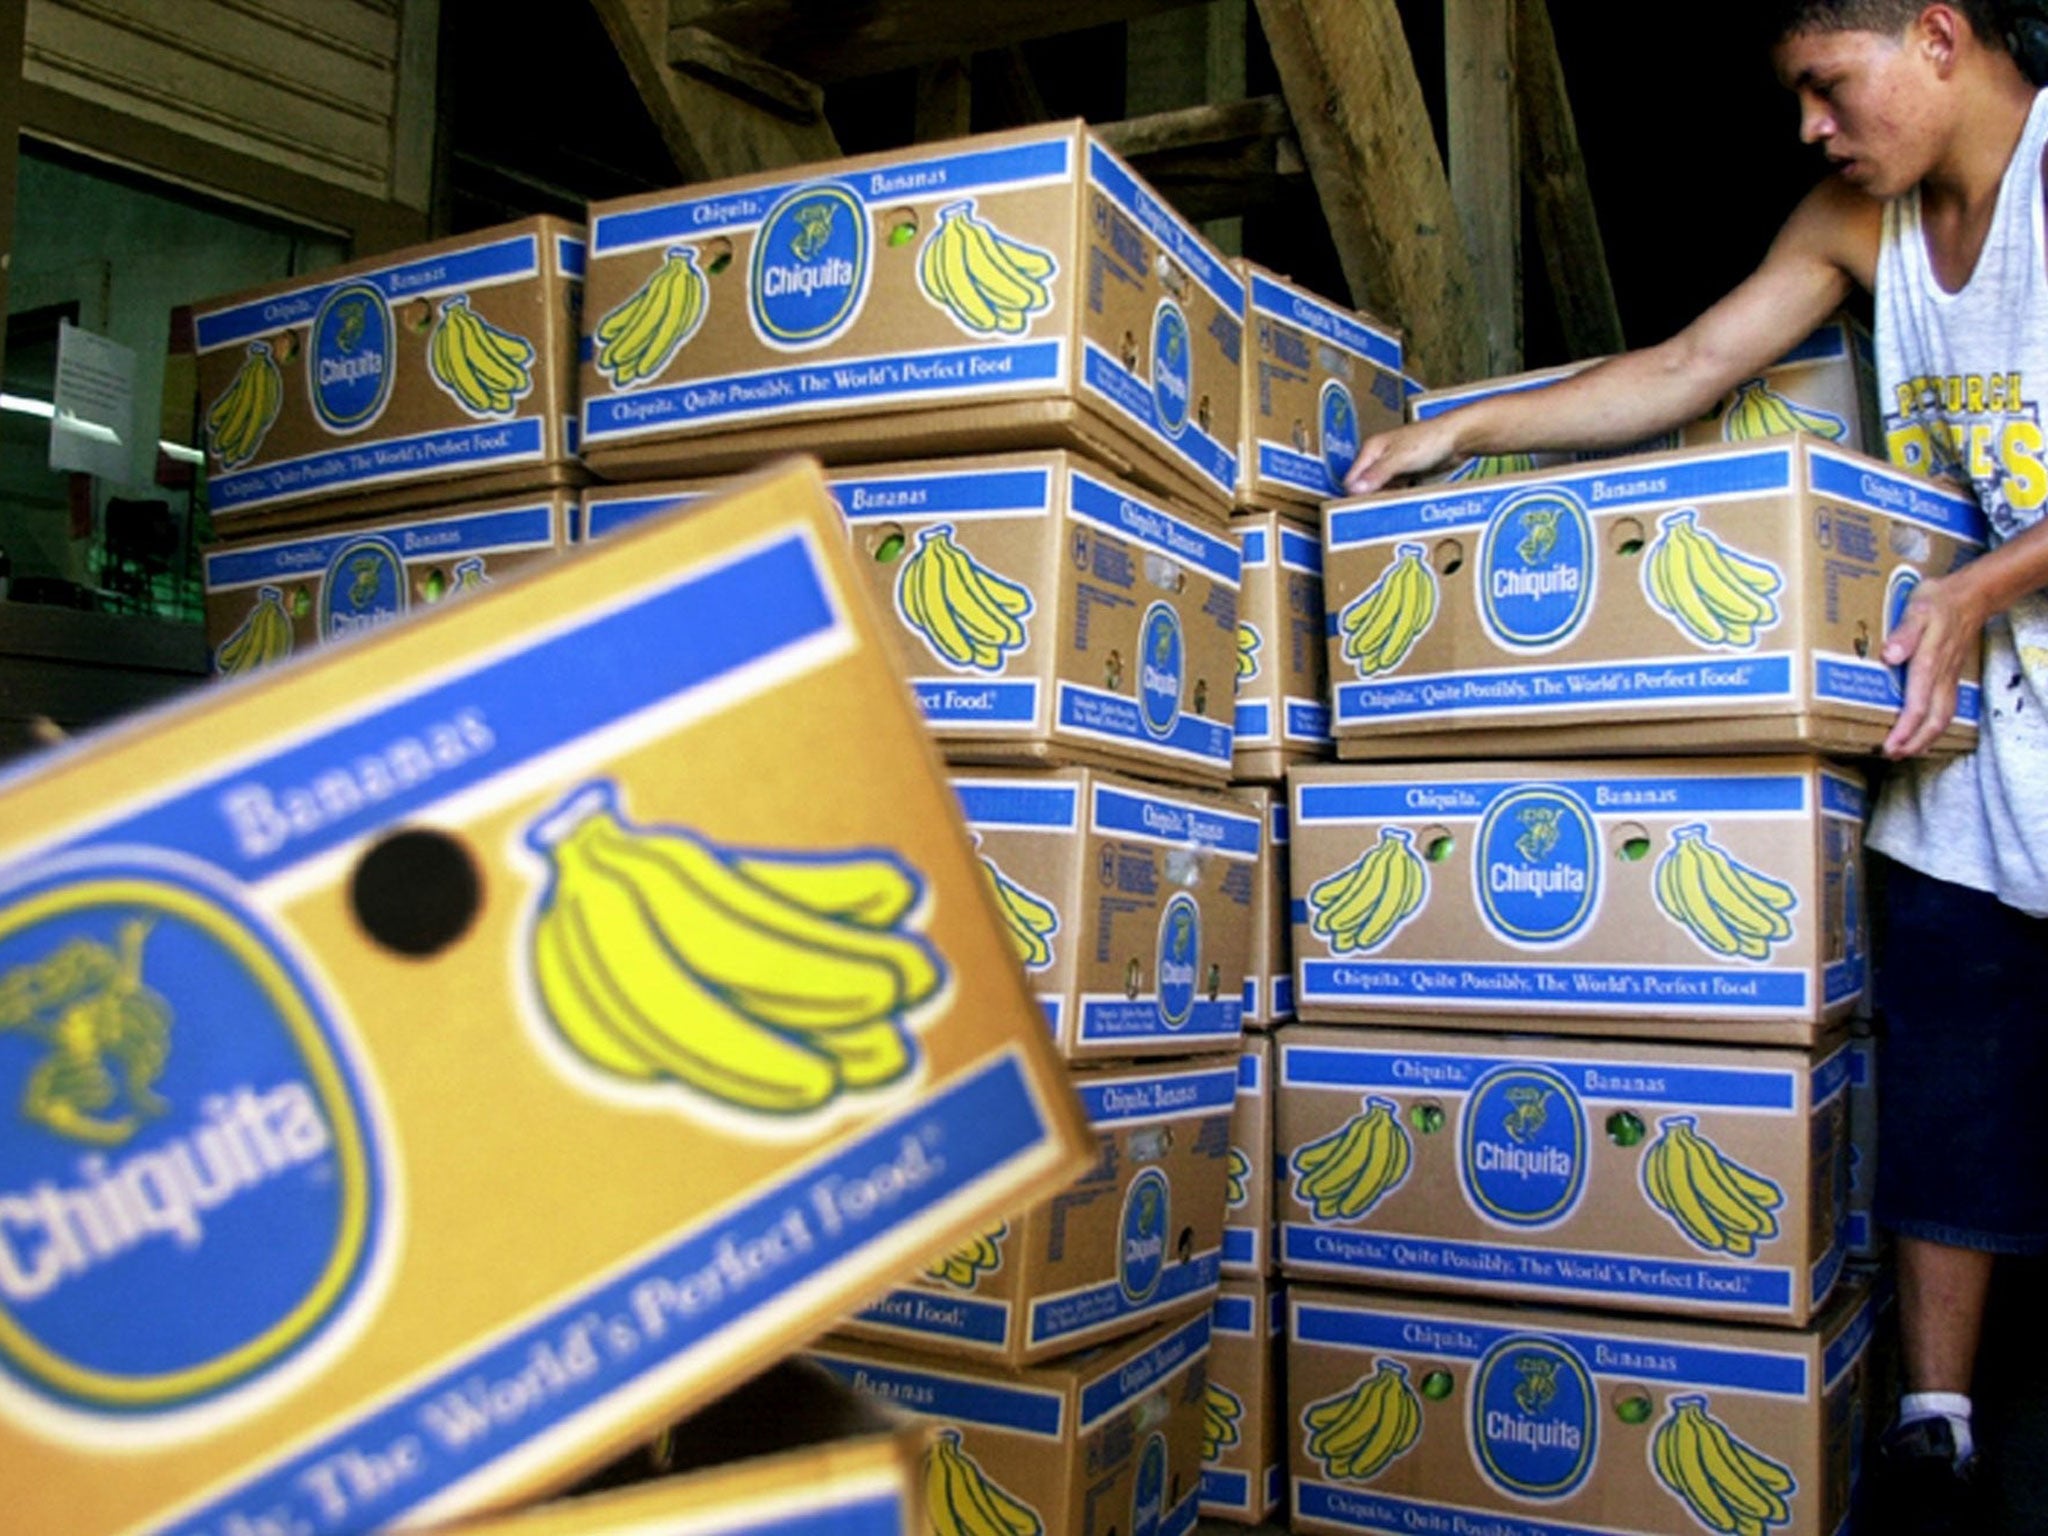 Chiquita had admitted paying $1.7m to a paramilitary group